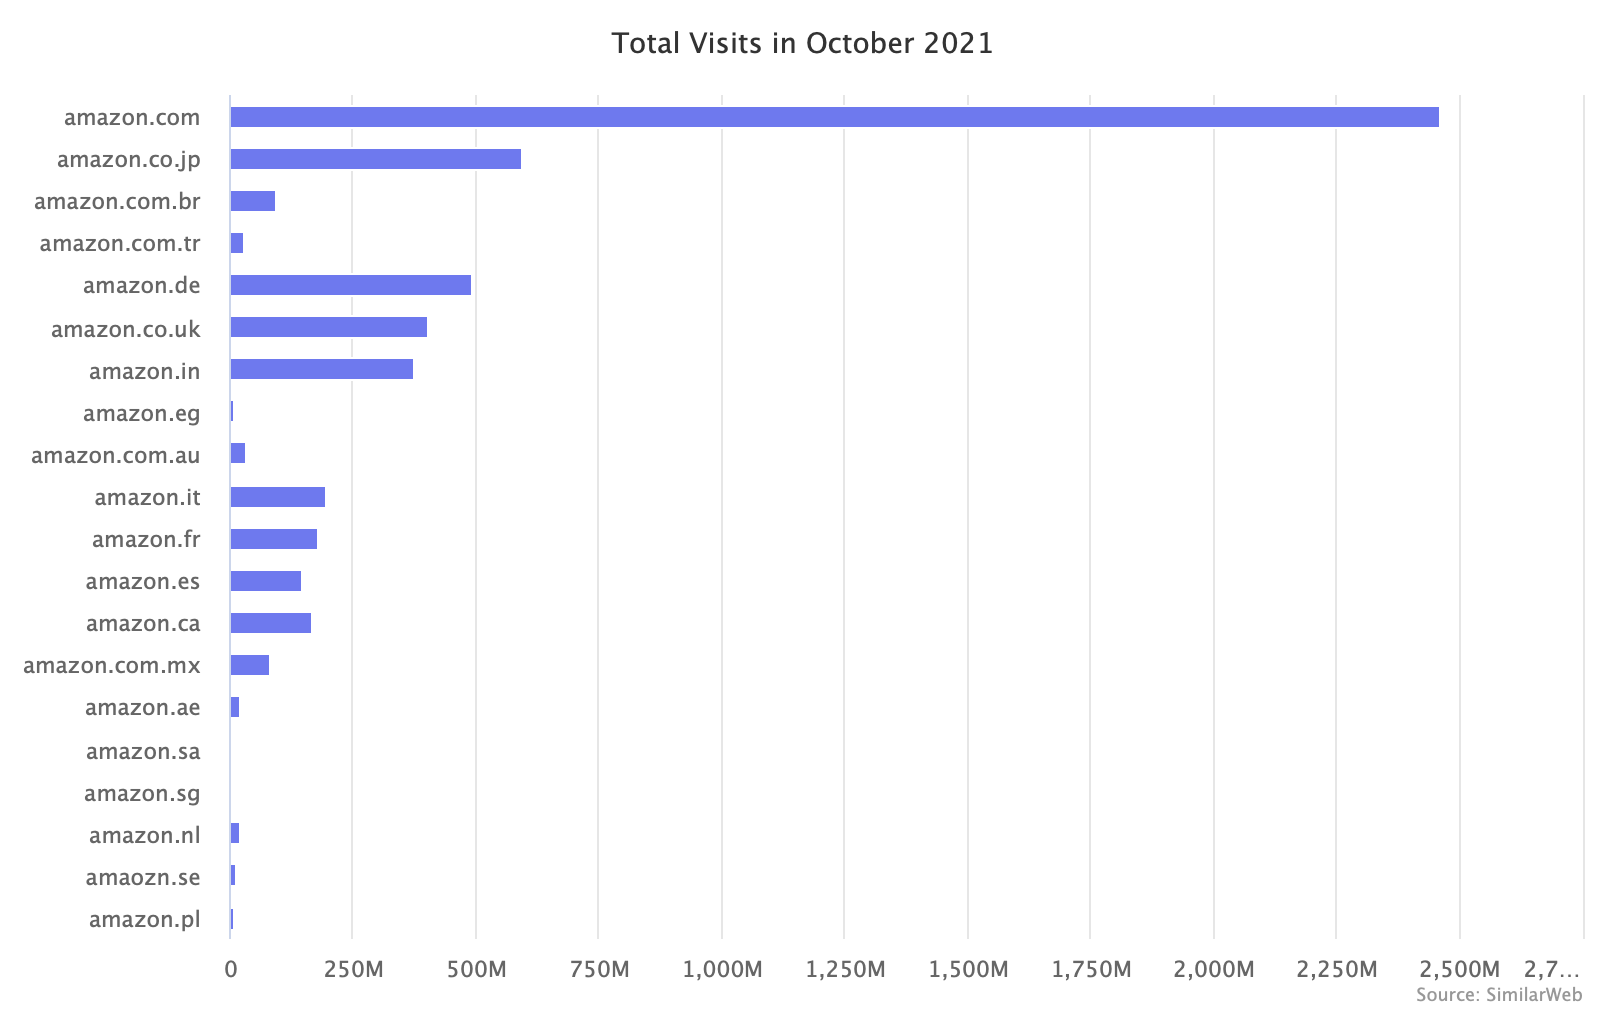 Total Amazon Visits in October 2021